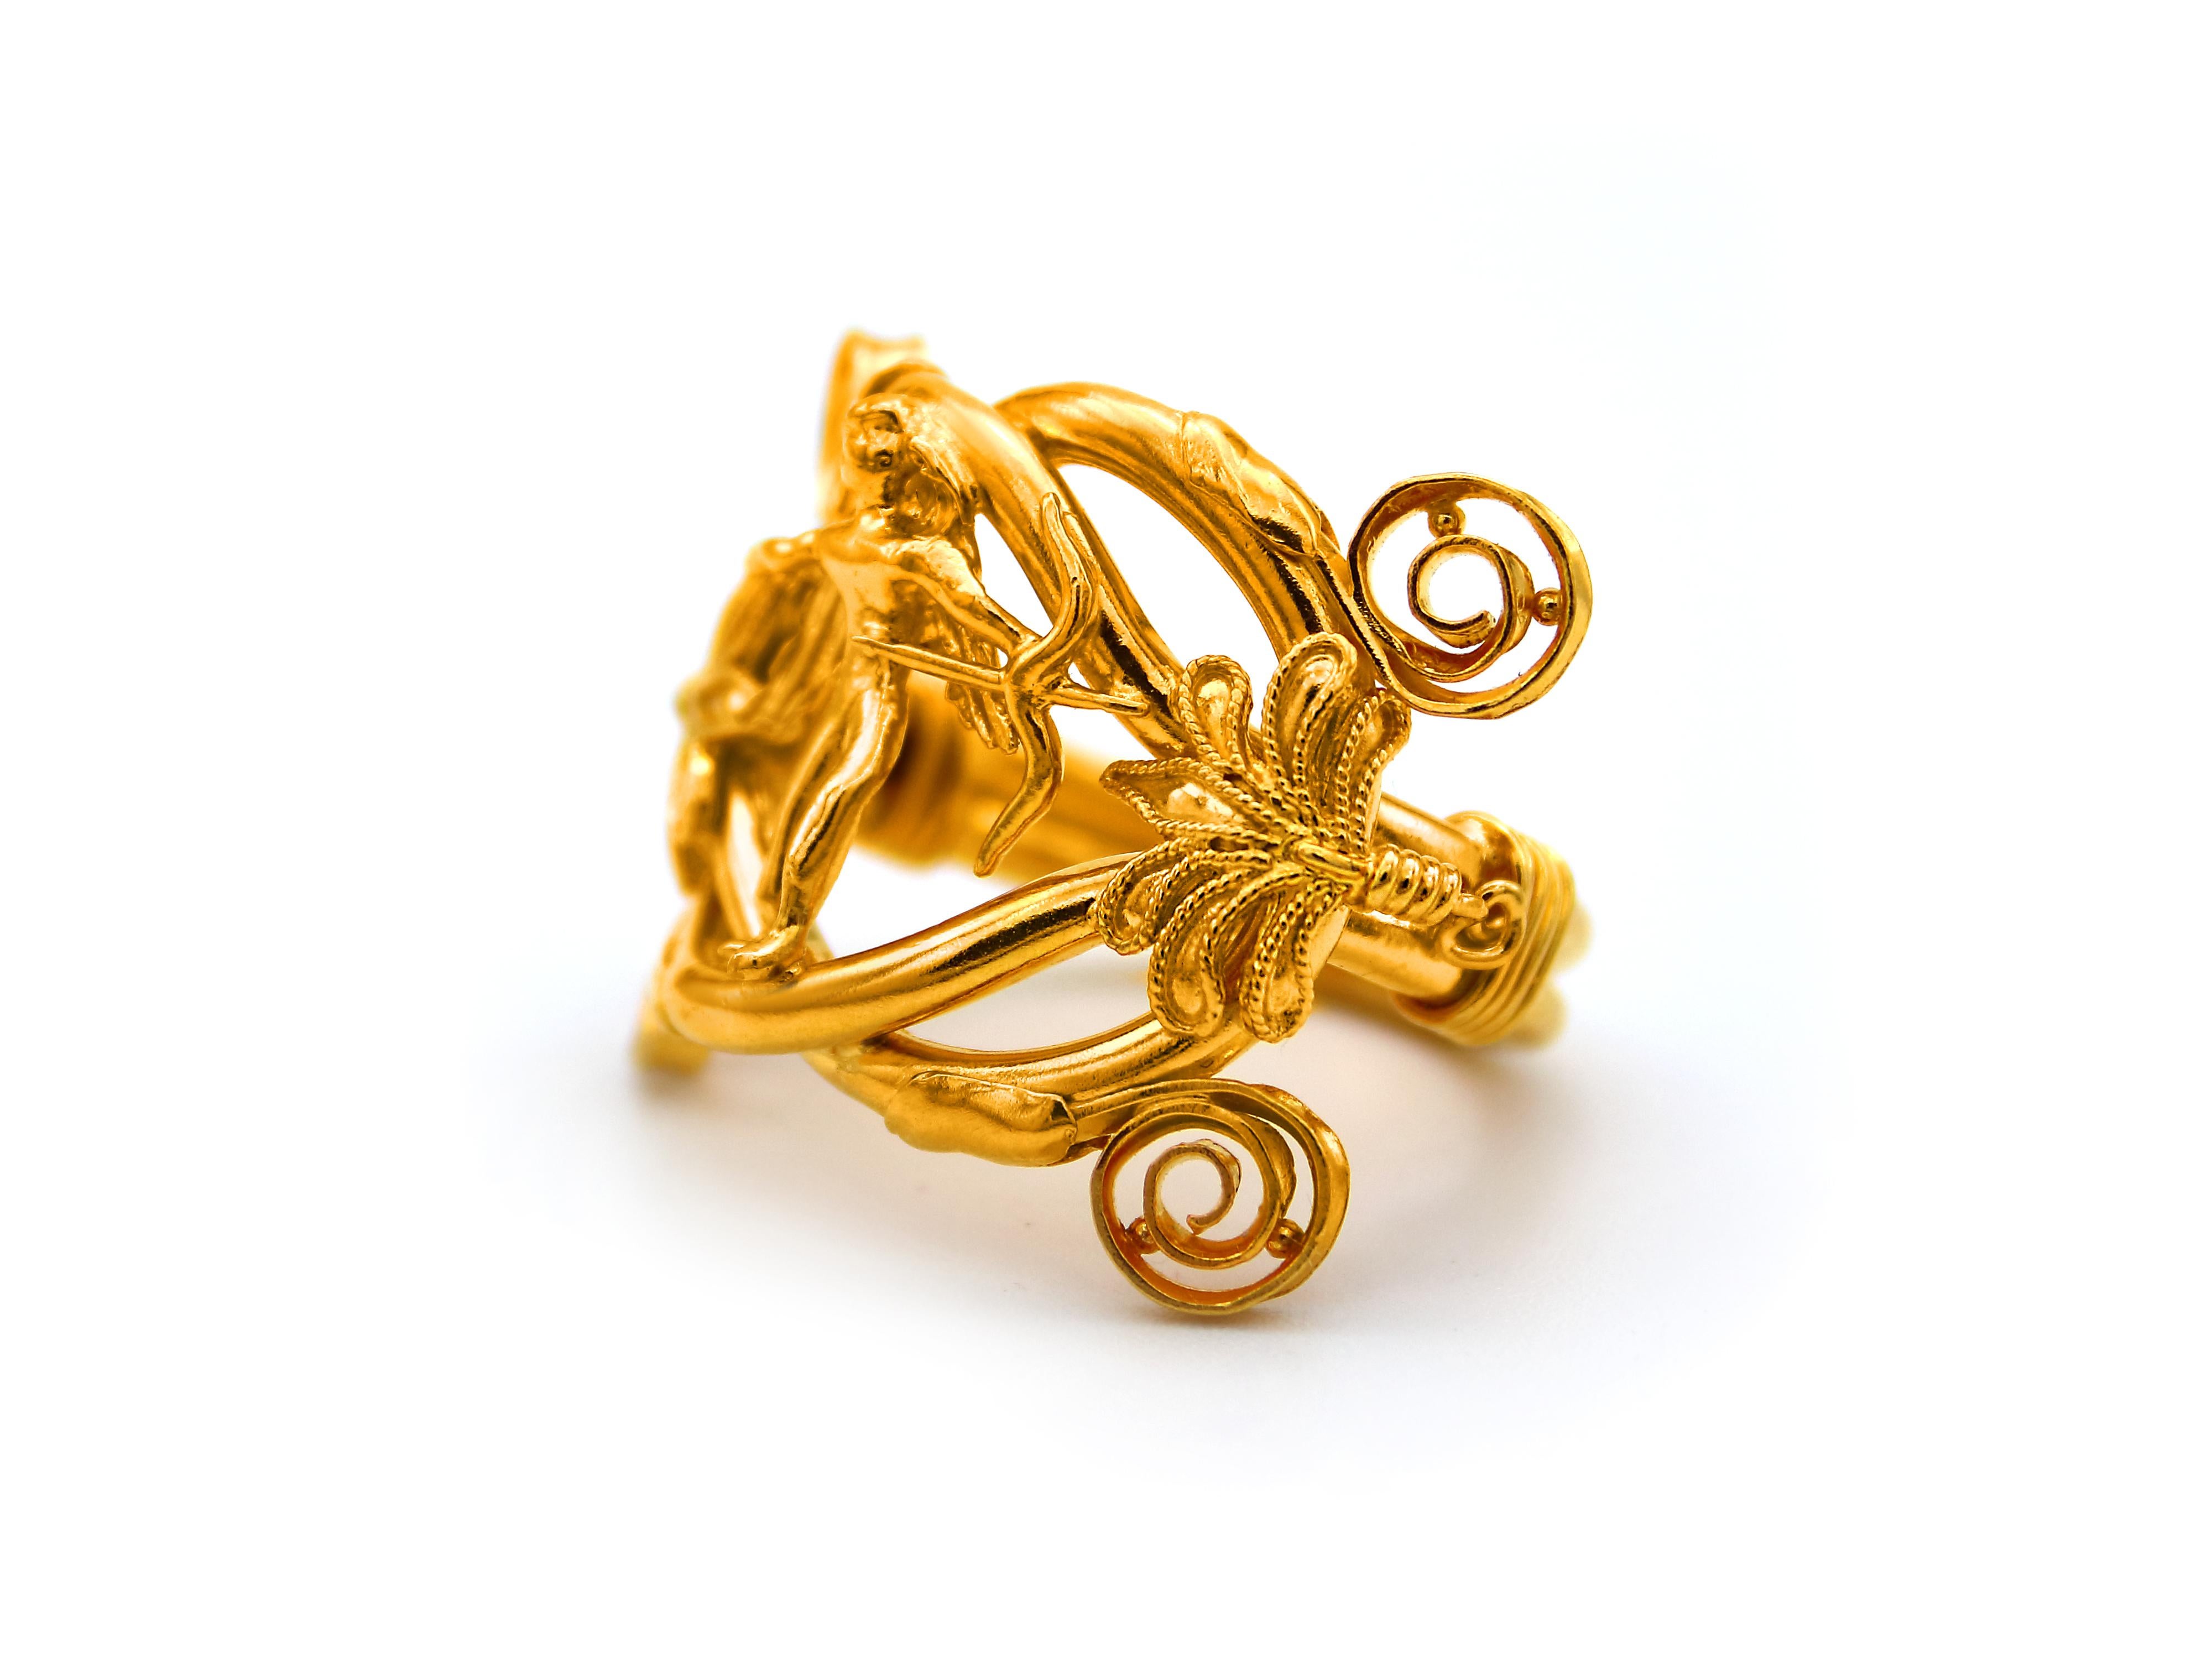 EROS (God of love) ring. Majestic ring set in 22 karats gold inspired from the original necklace of the mid-4th century BC found in the excavation at Macedonia area where was the Palace of King Philip King of the Macedonians and father of Alexander